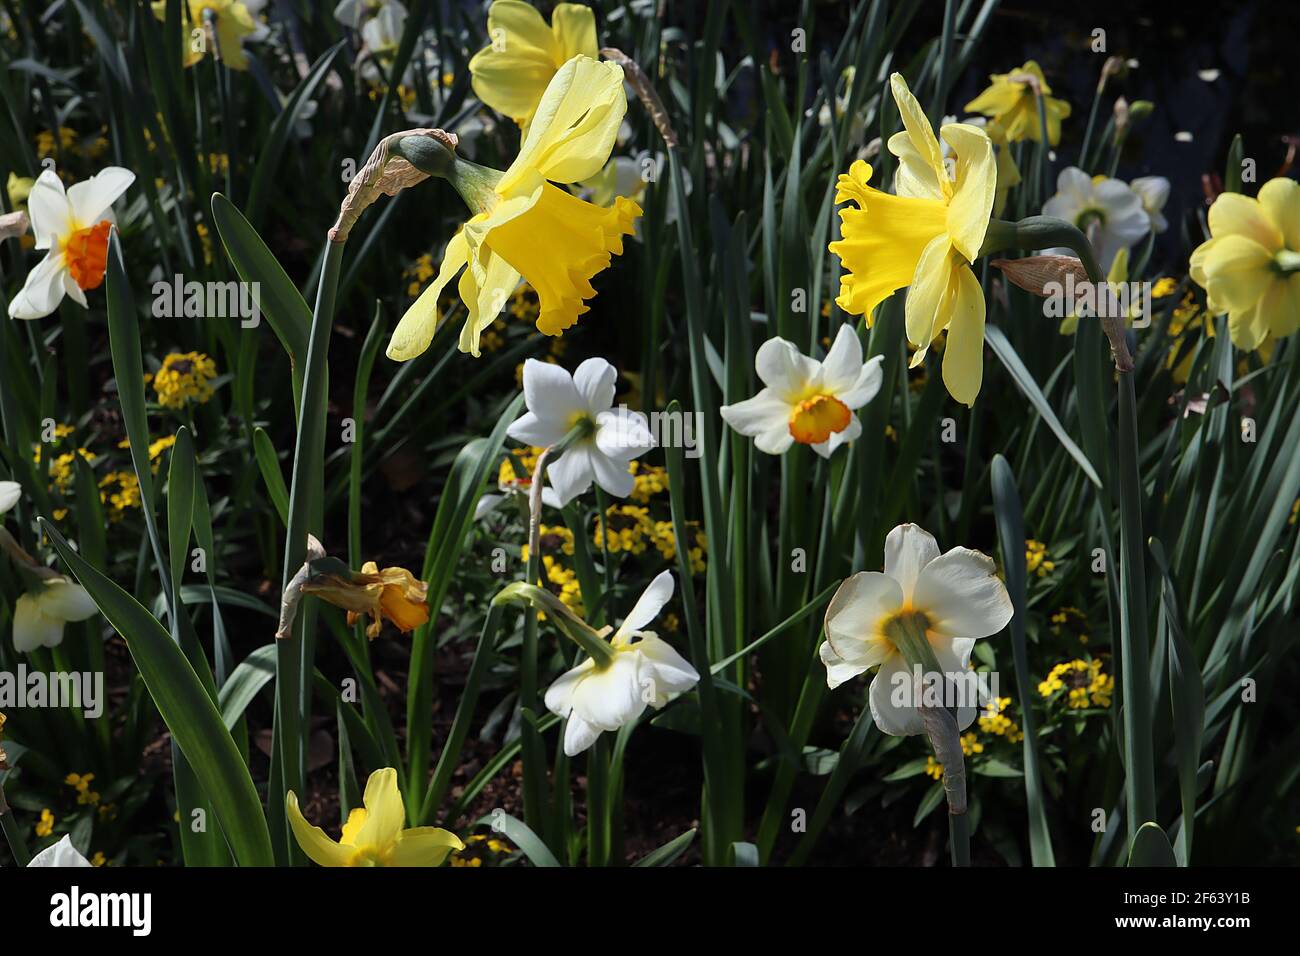 Narcissus ‘Verger’  Narcissus ‘Dutch Master’ March, England, UK Stock Photo